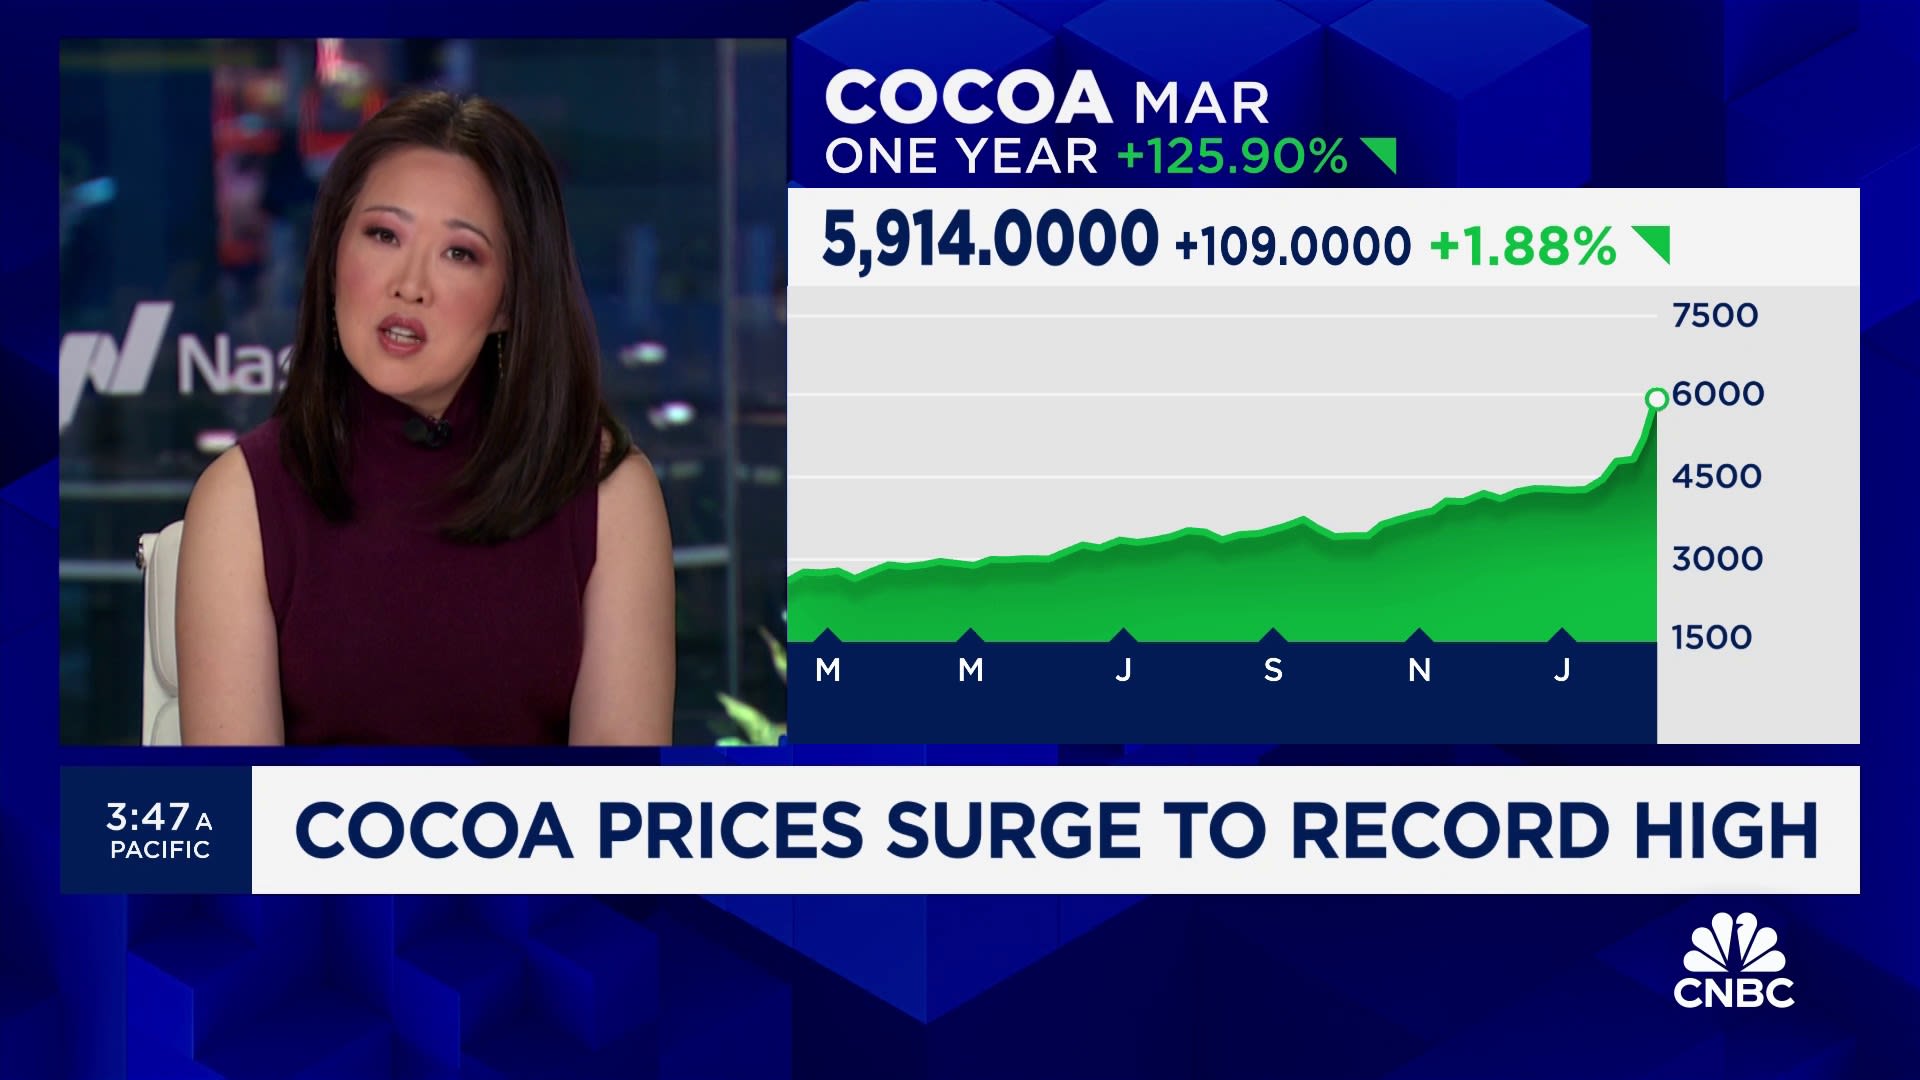 Cocoa prices surge to record high